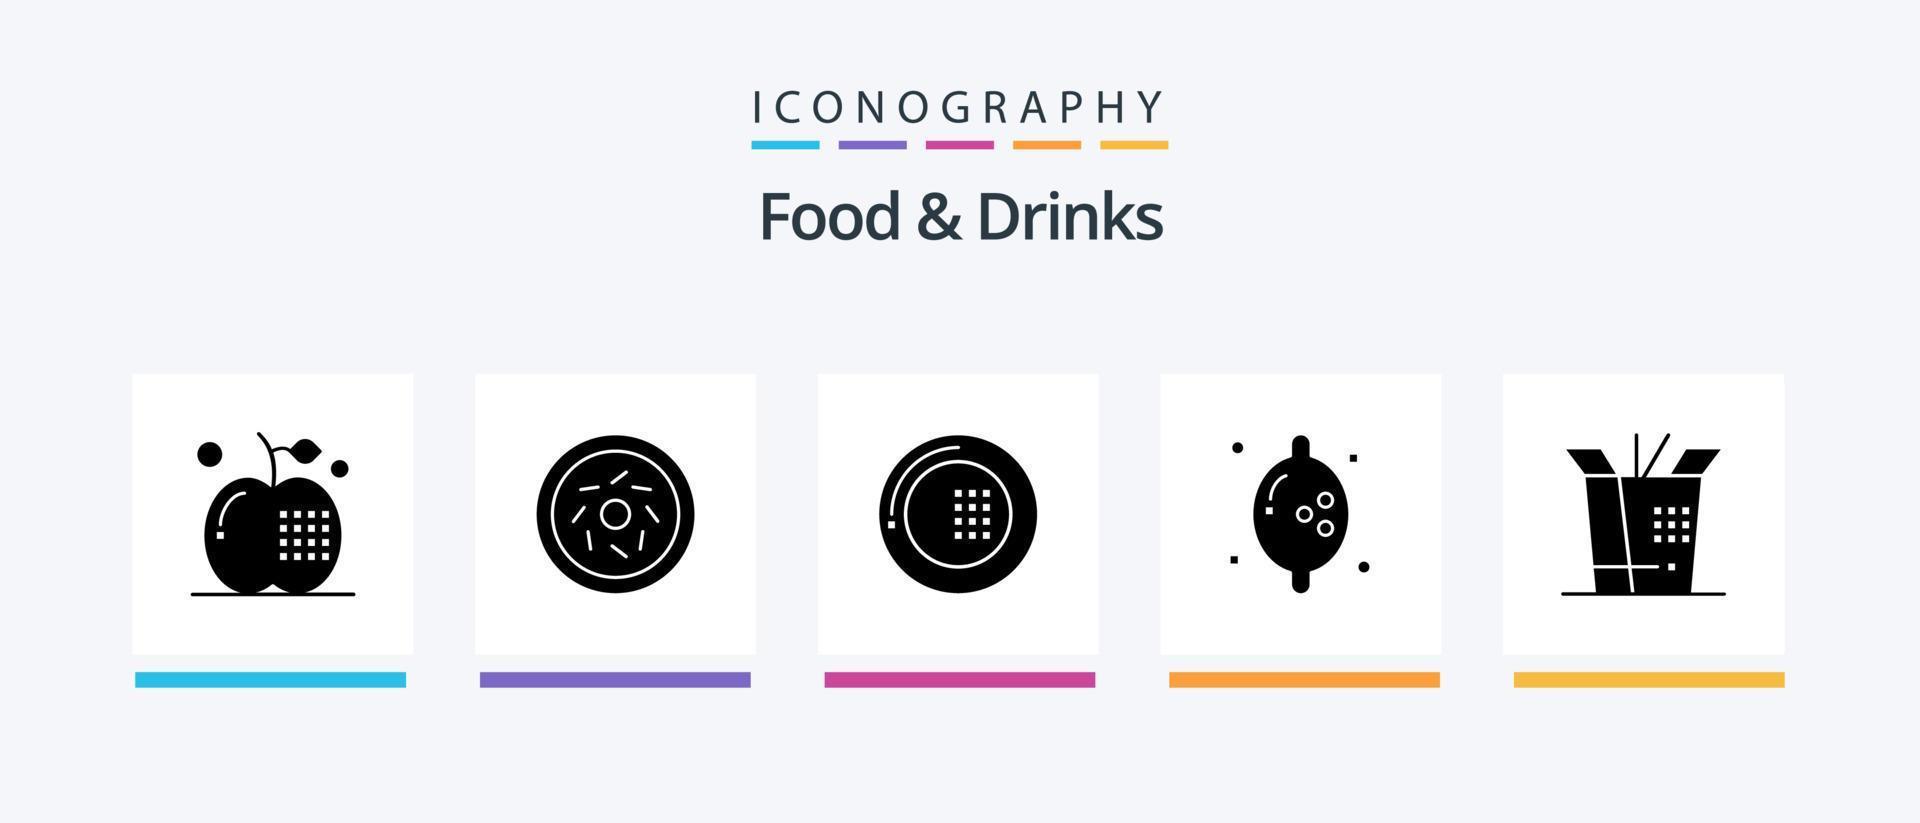 Food and Drinks Glyph 5 Icon Pack Including wok. lemon. cooking. fruit. plate. Creative Icons Design vector